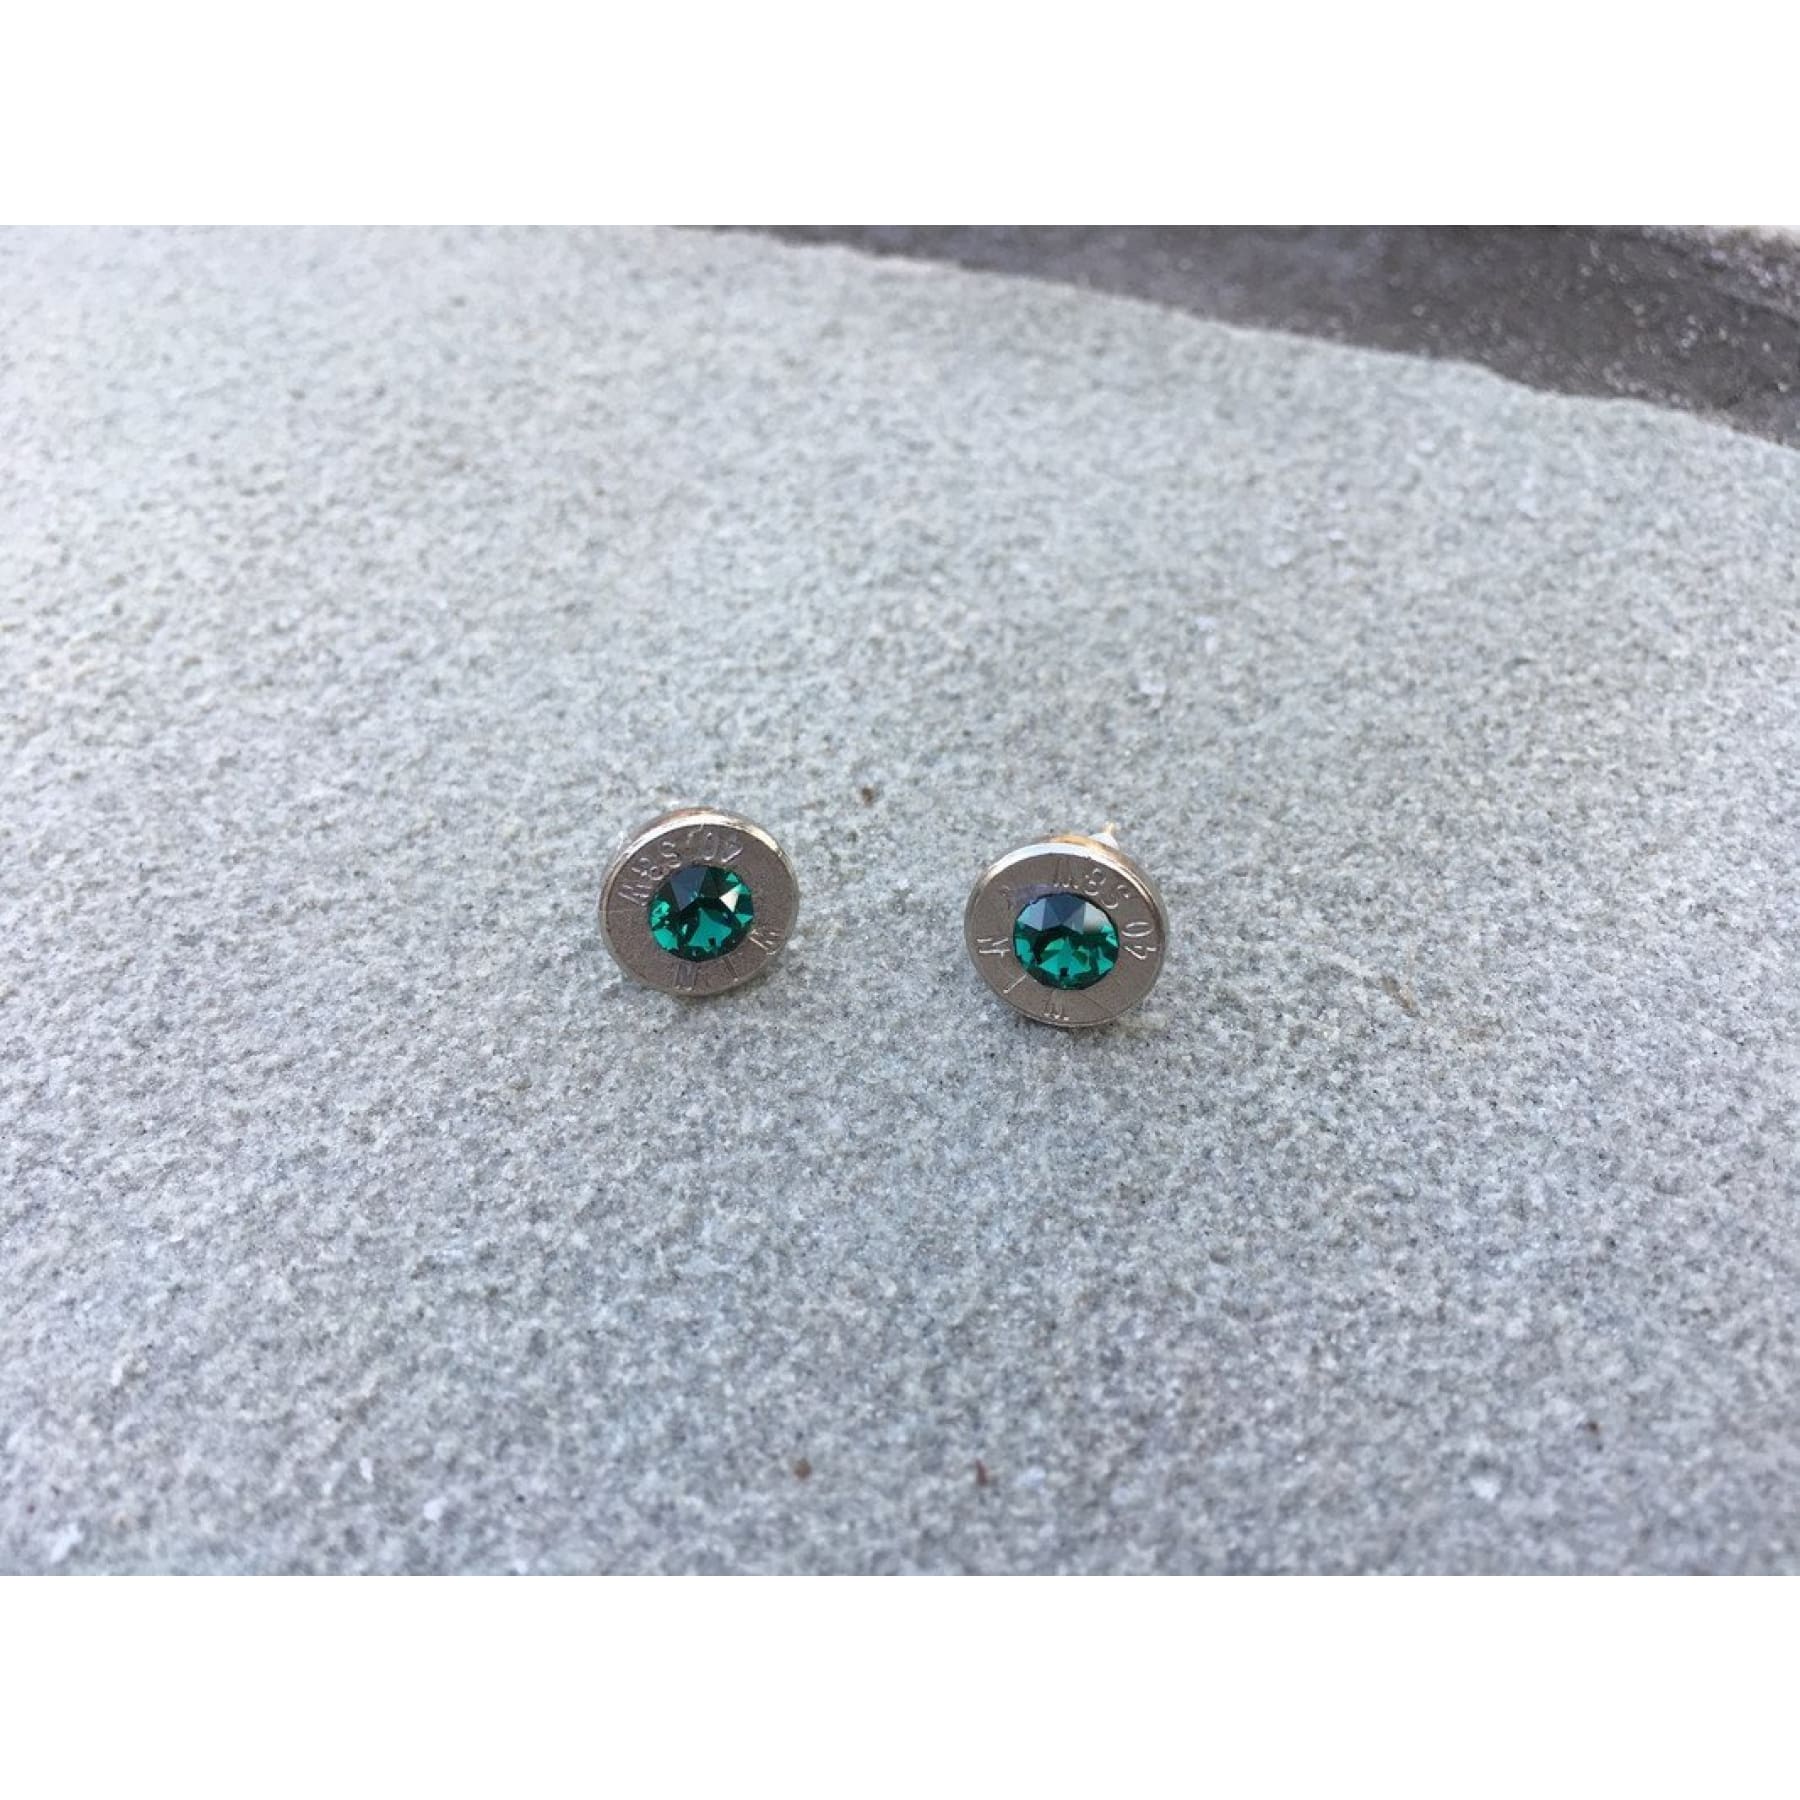 Handcrafted Bullet Earrings with colored Swarovski Crystal centers,Earrings - Dirt Road Divas Boutique